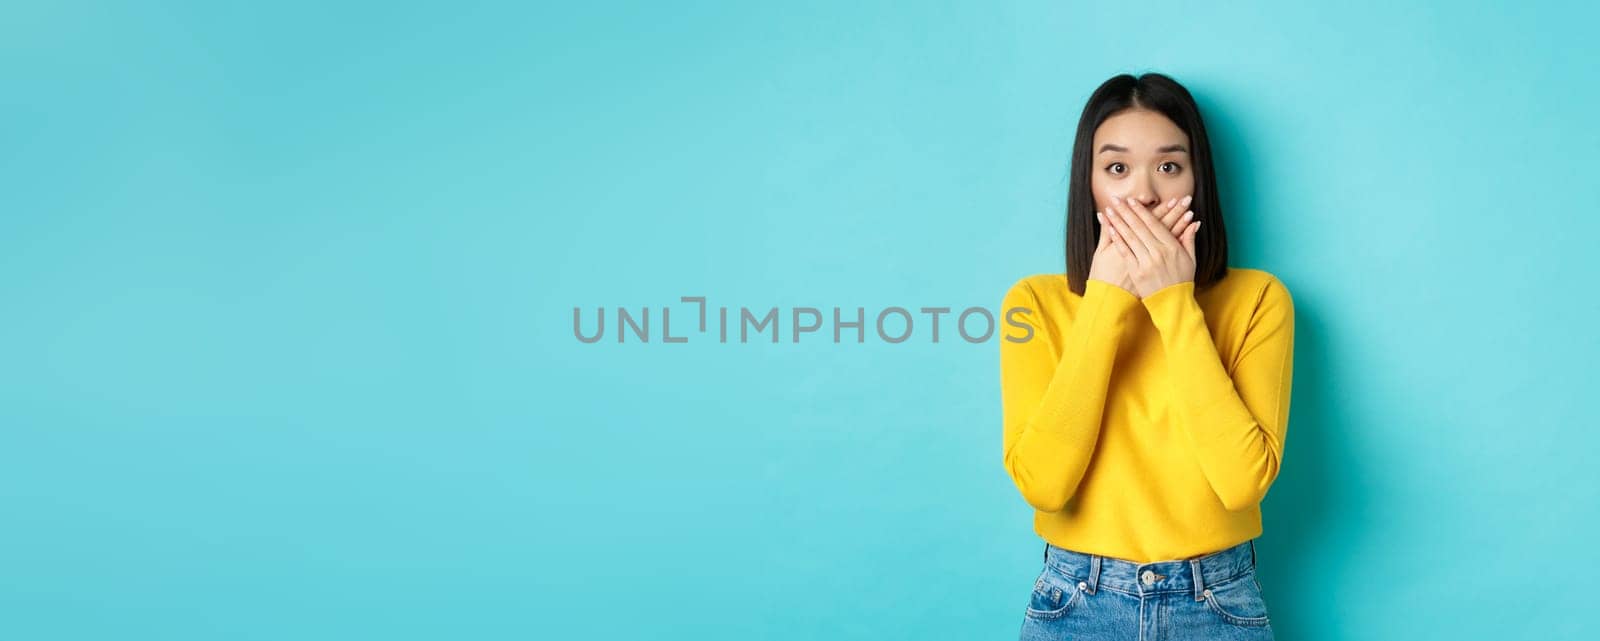 Image of shocked asian girl cover mouth and staring at camera, wearing yellow sweater against blue background.